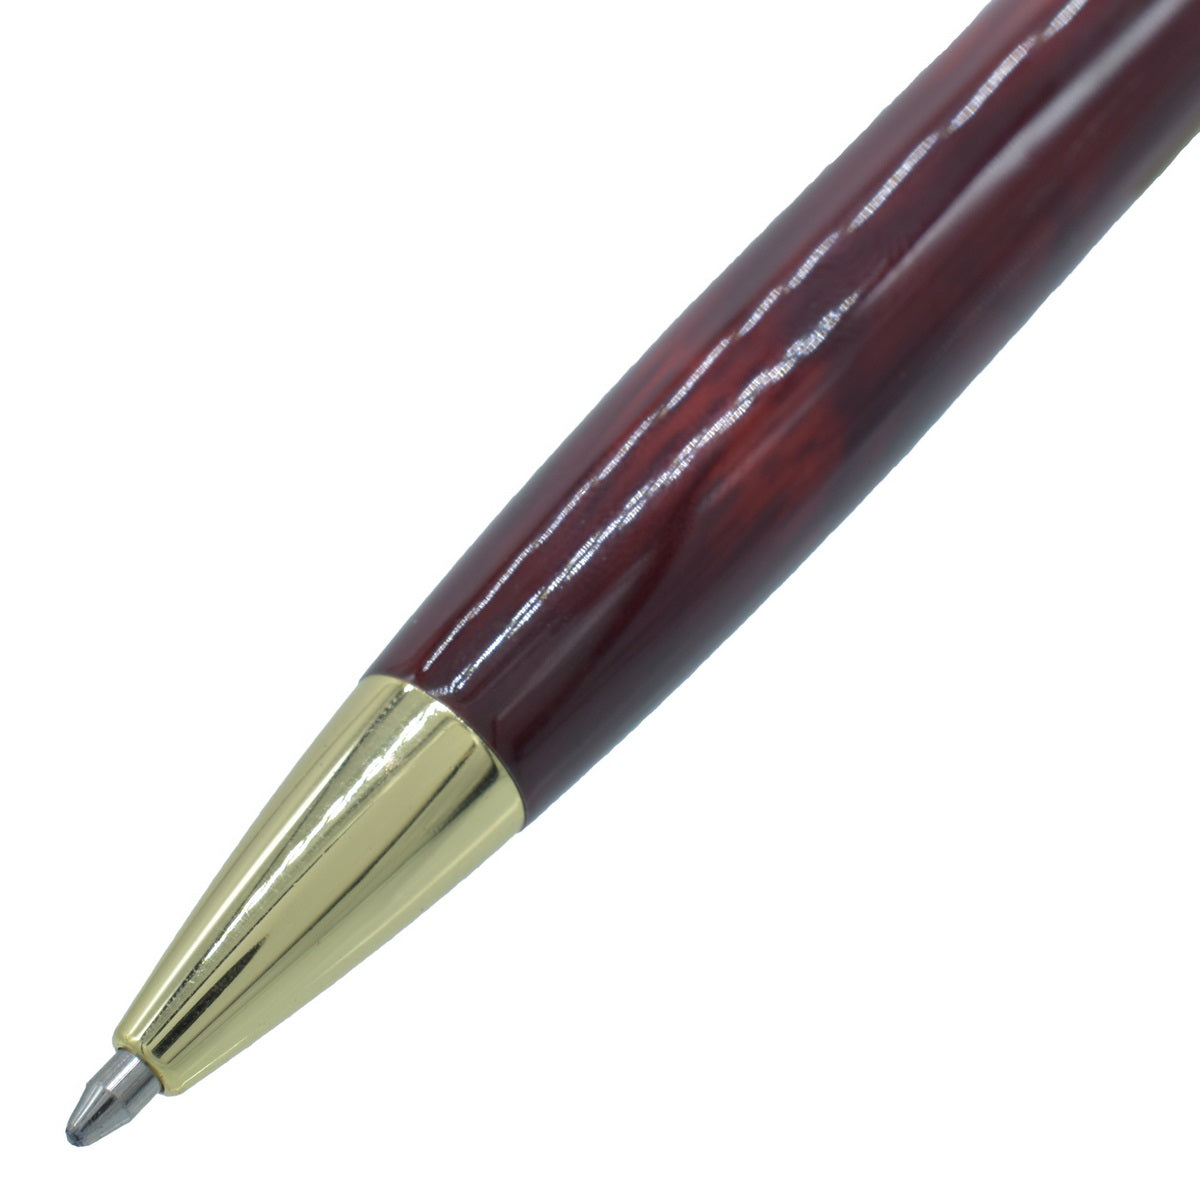 Red Color Ball Pen with Golden Clip - For Office, College, Personal Use - JA679BPRDGC